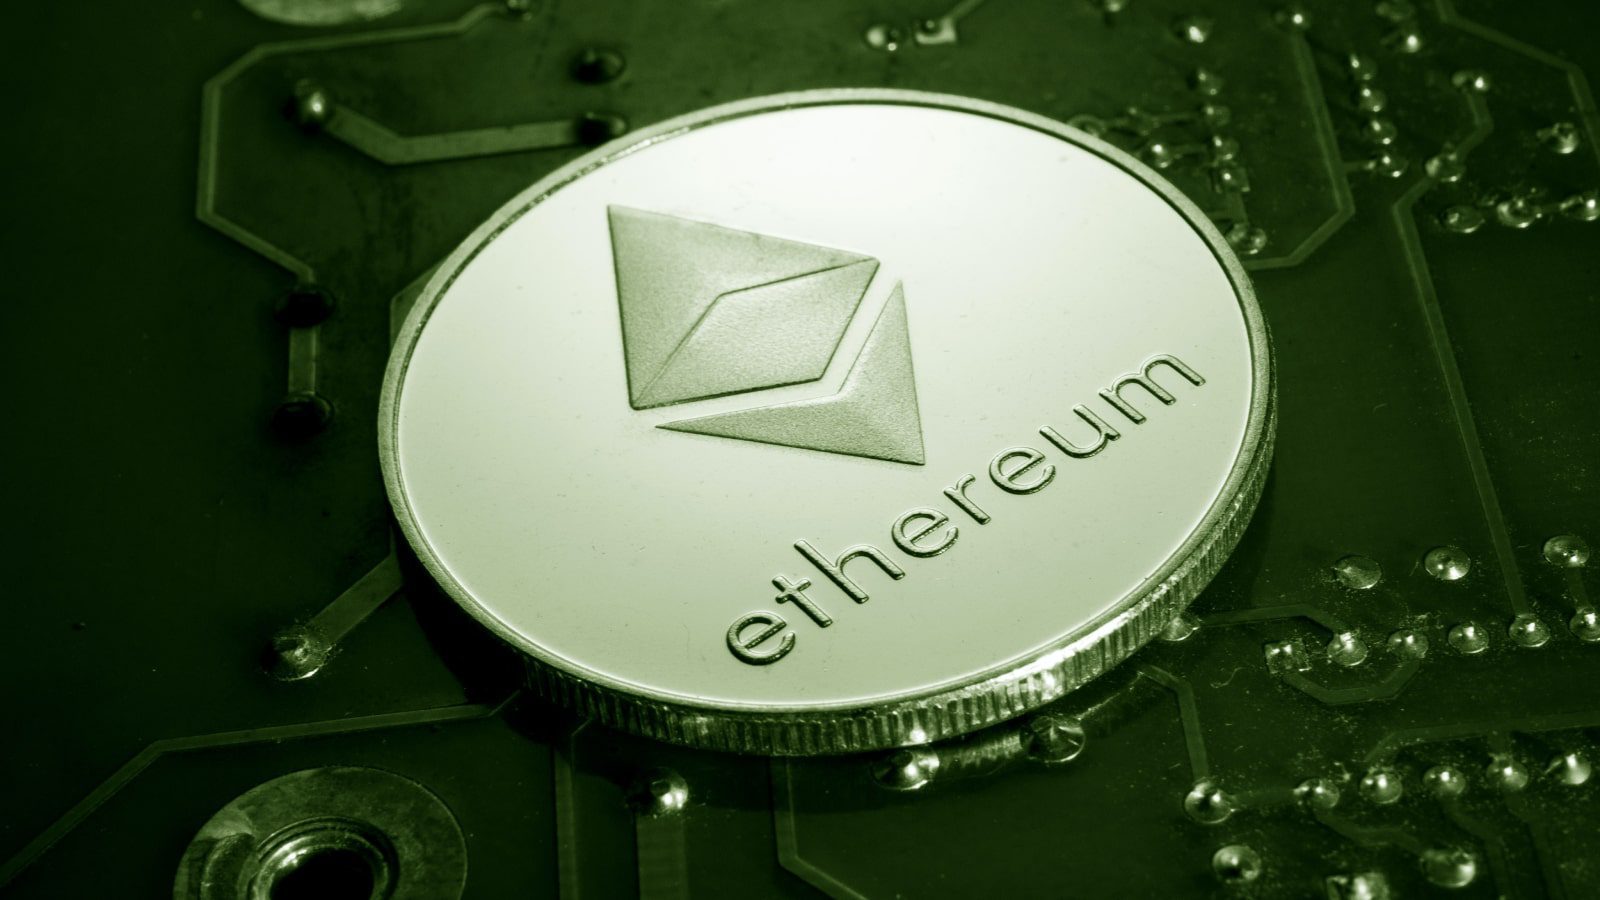 An Ethereum coin on a circuit board.